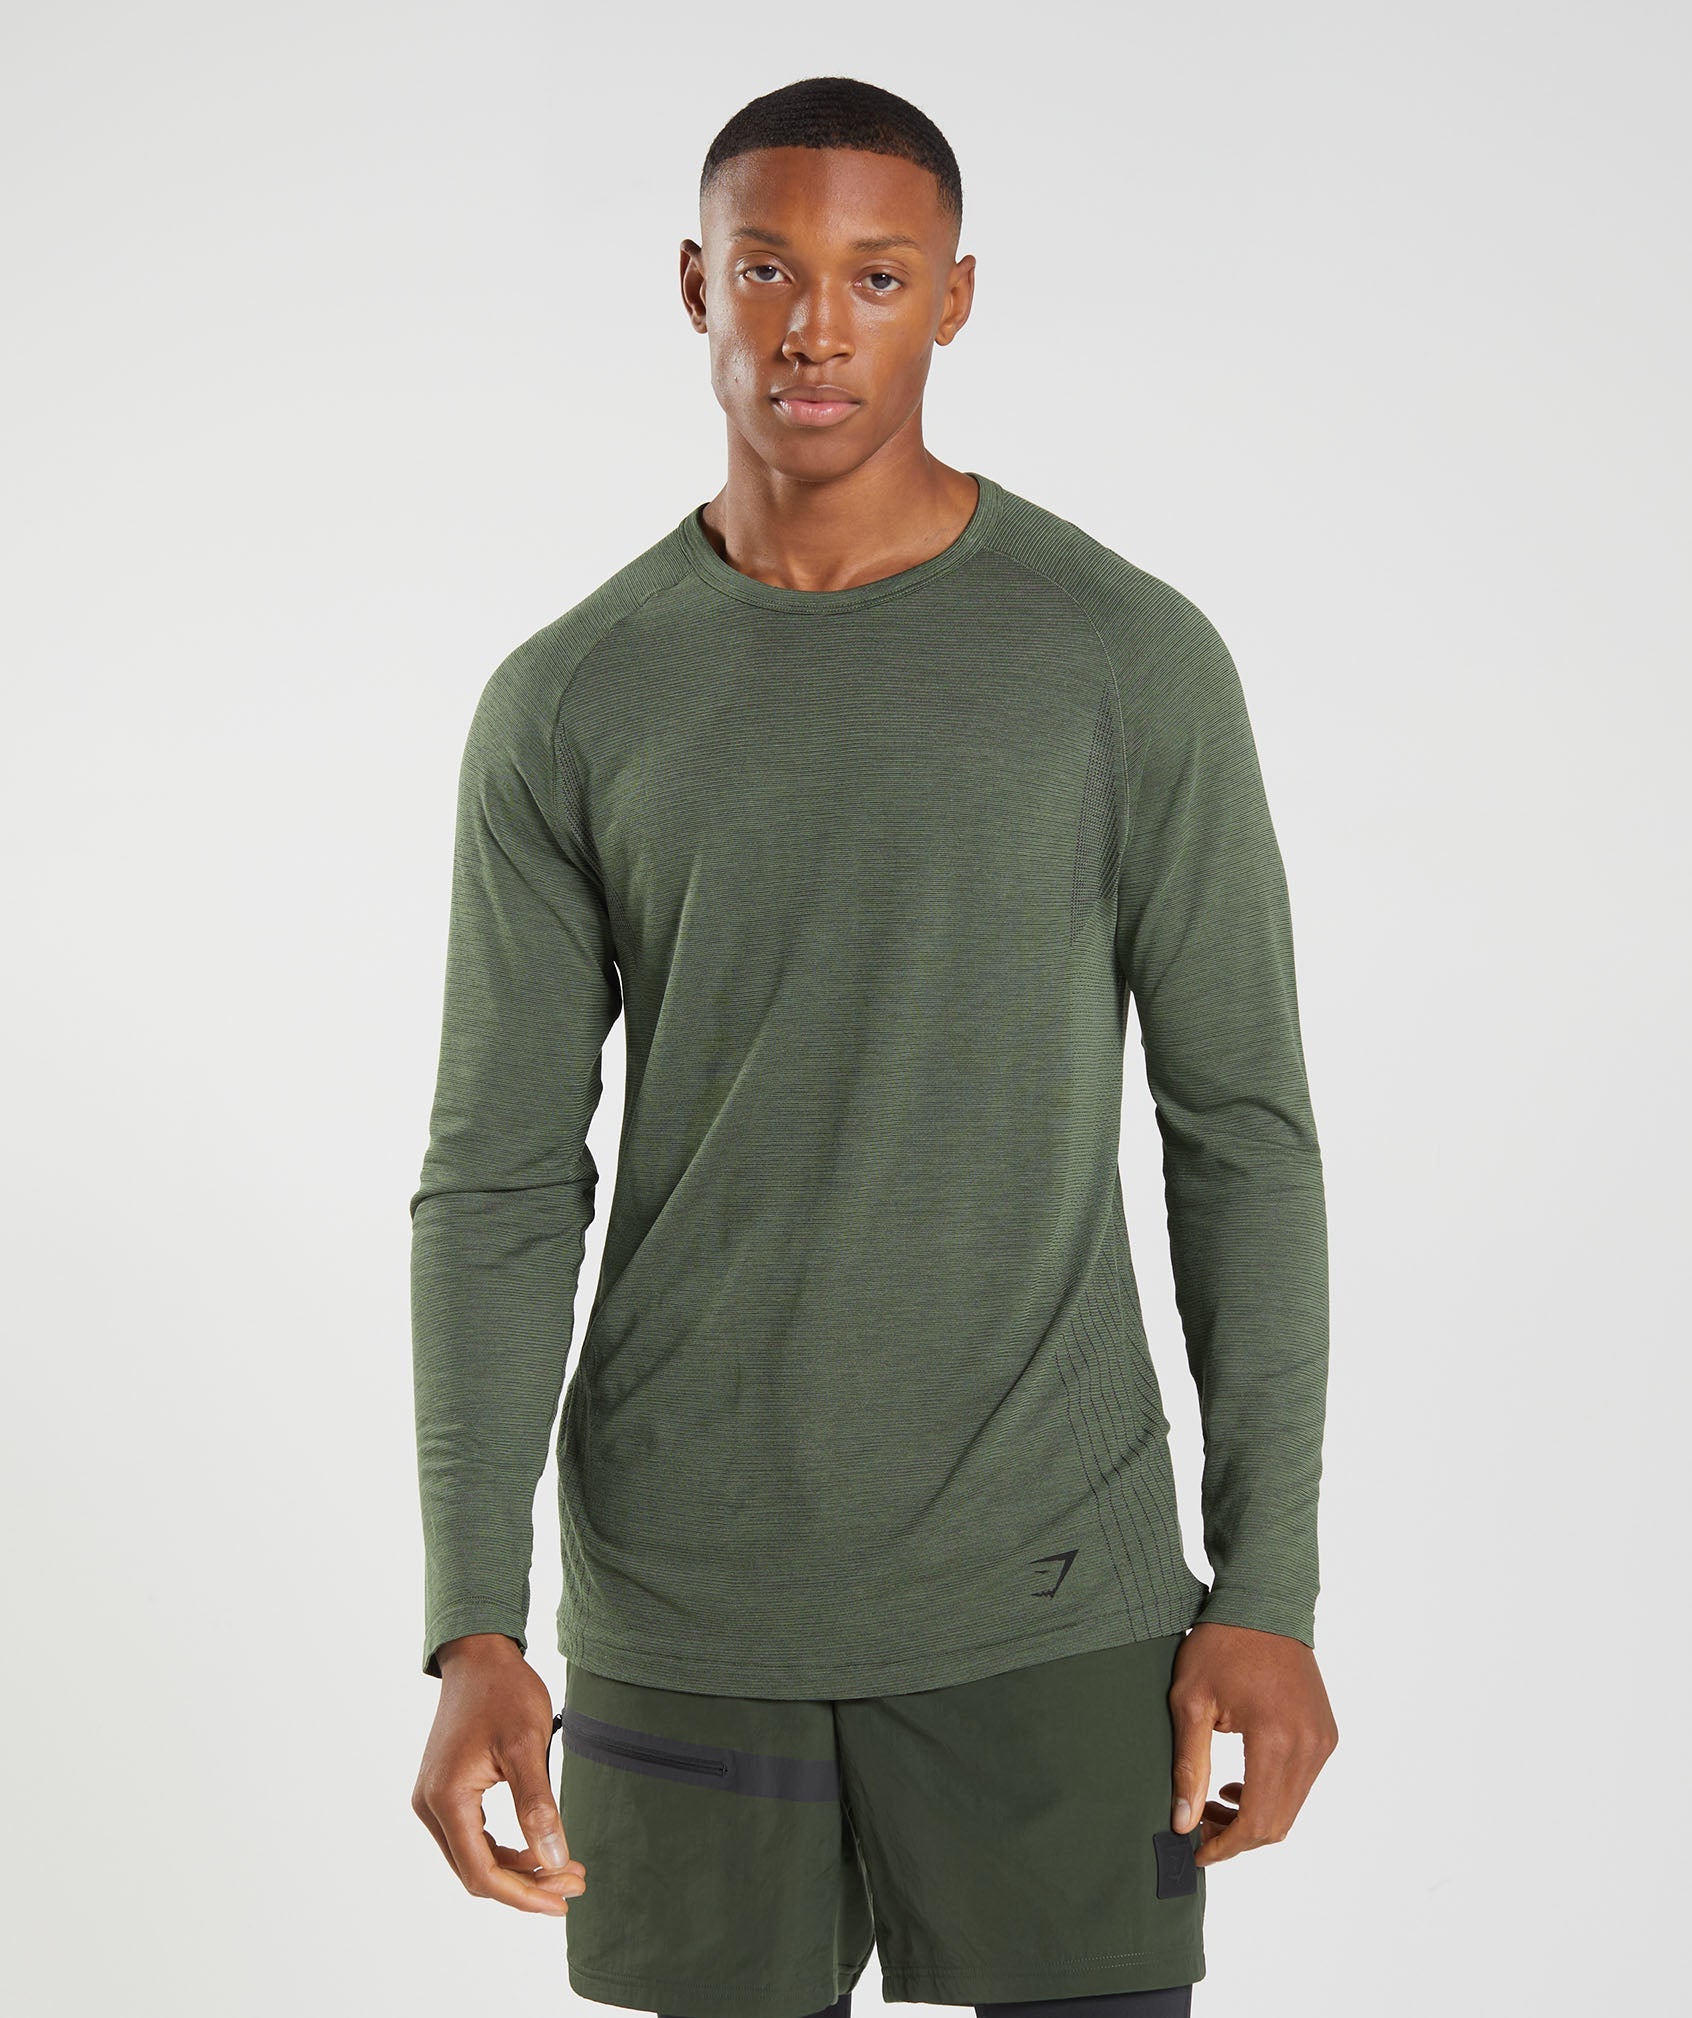 Retake Seamless Long Sleeve T-Shirt in Core Olive - view 1